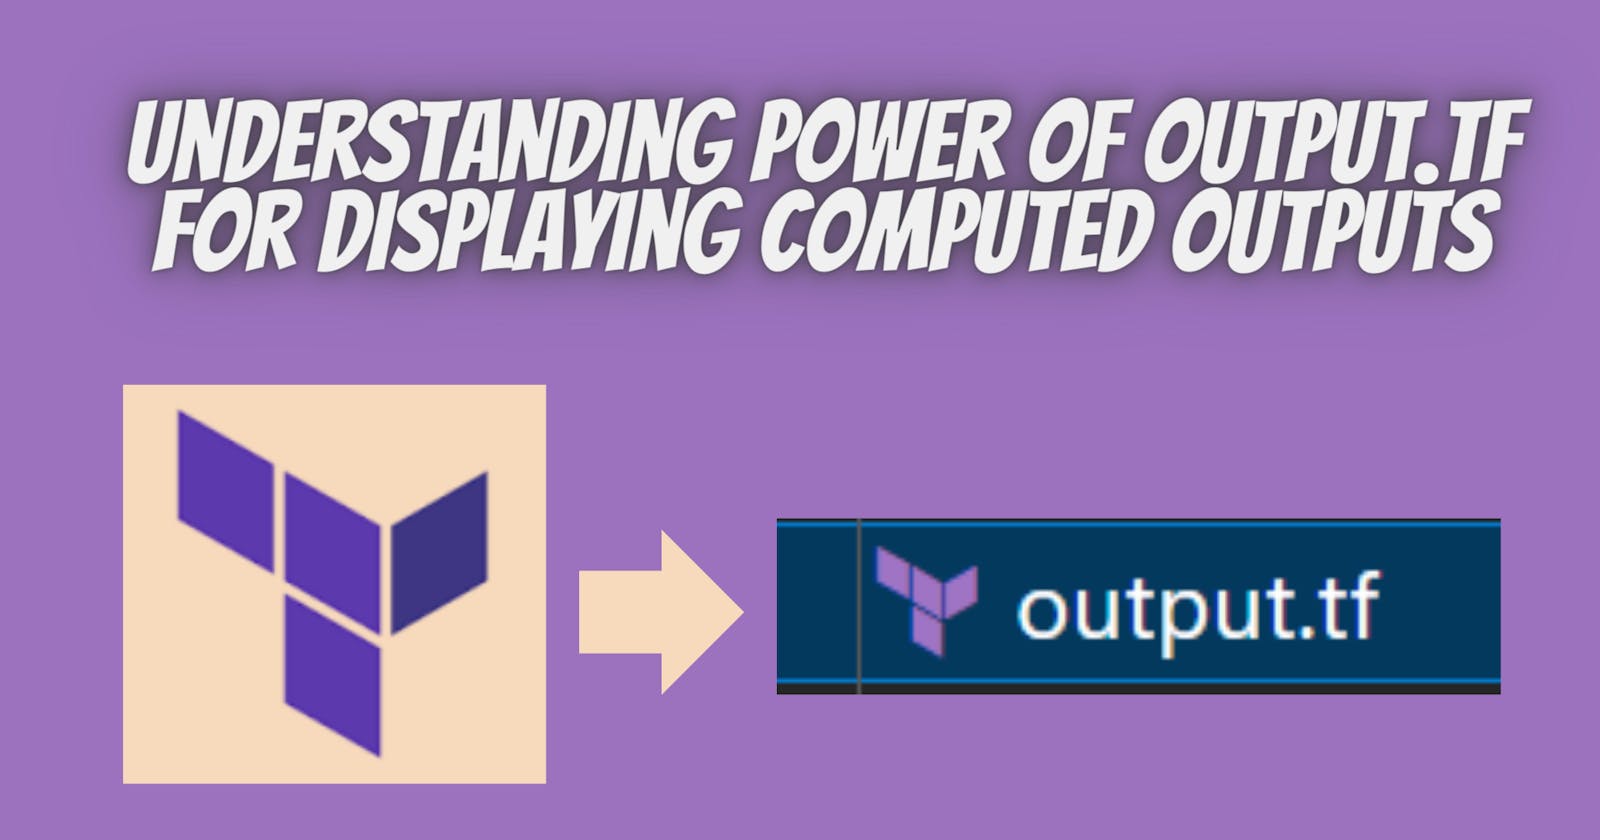 Understanding the Power of output.tf for Displaying Computed Outputs